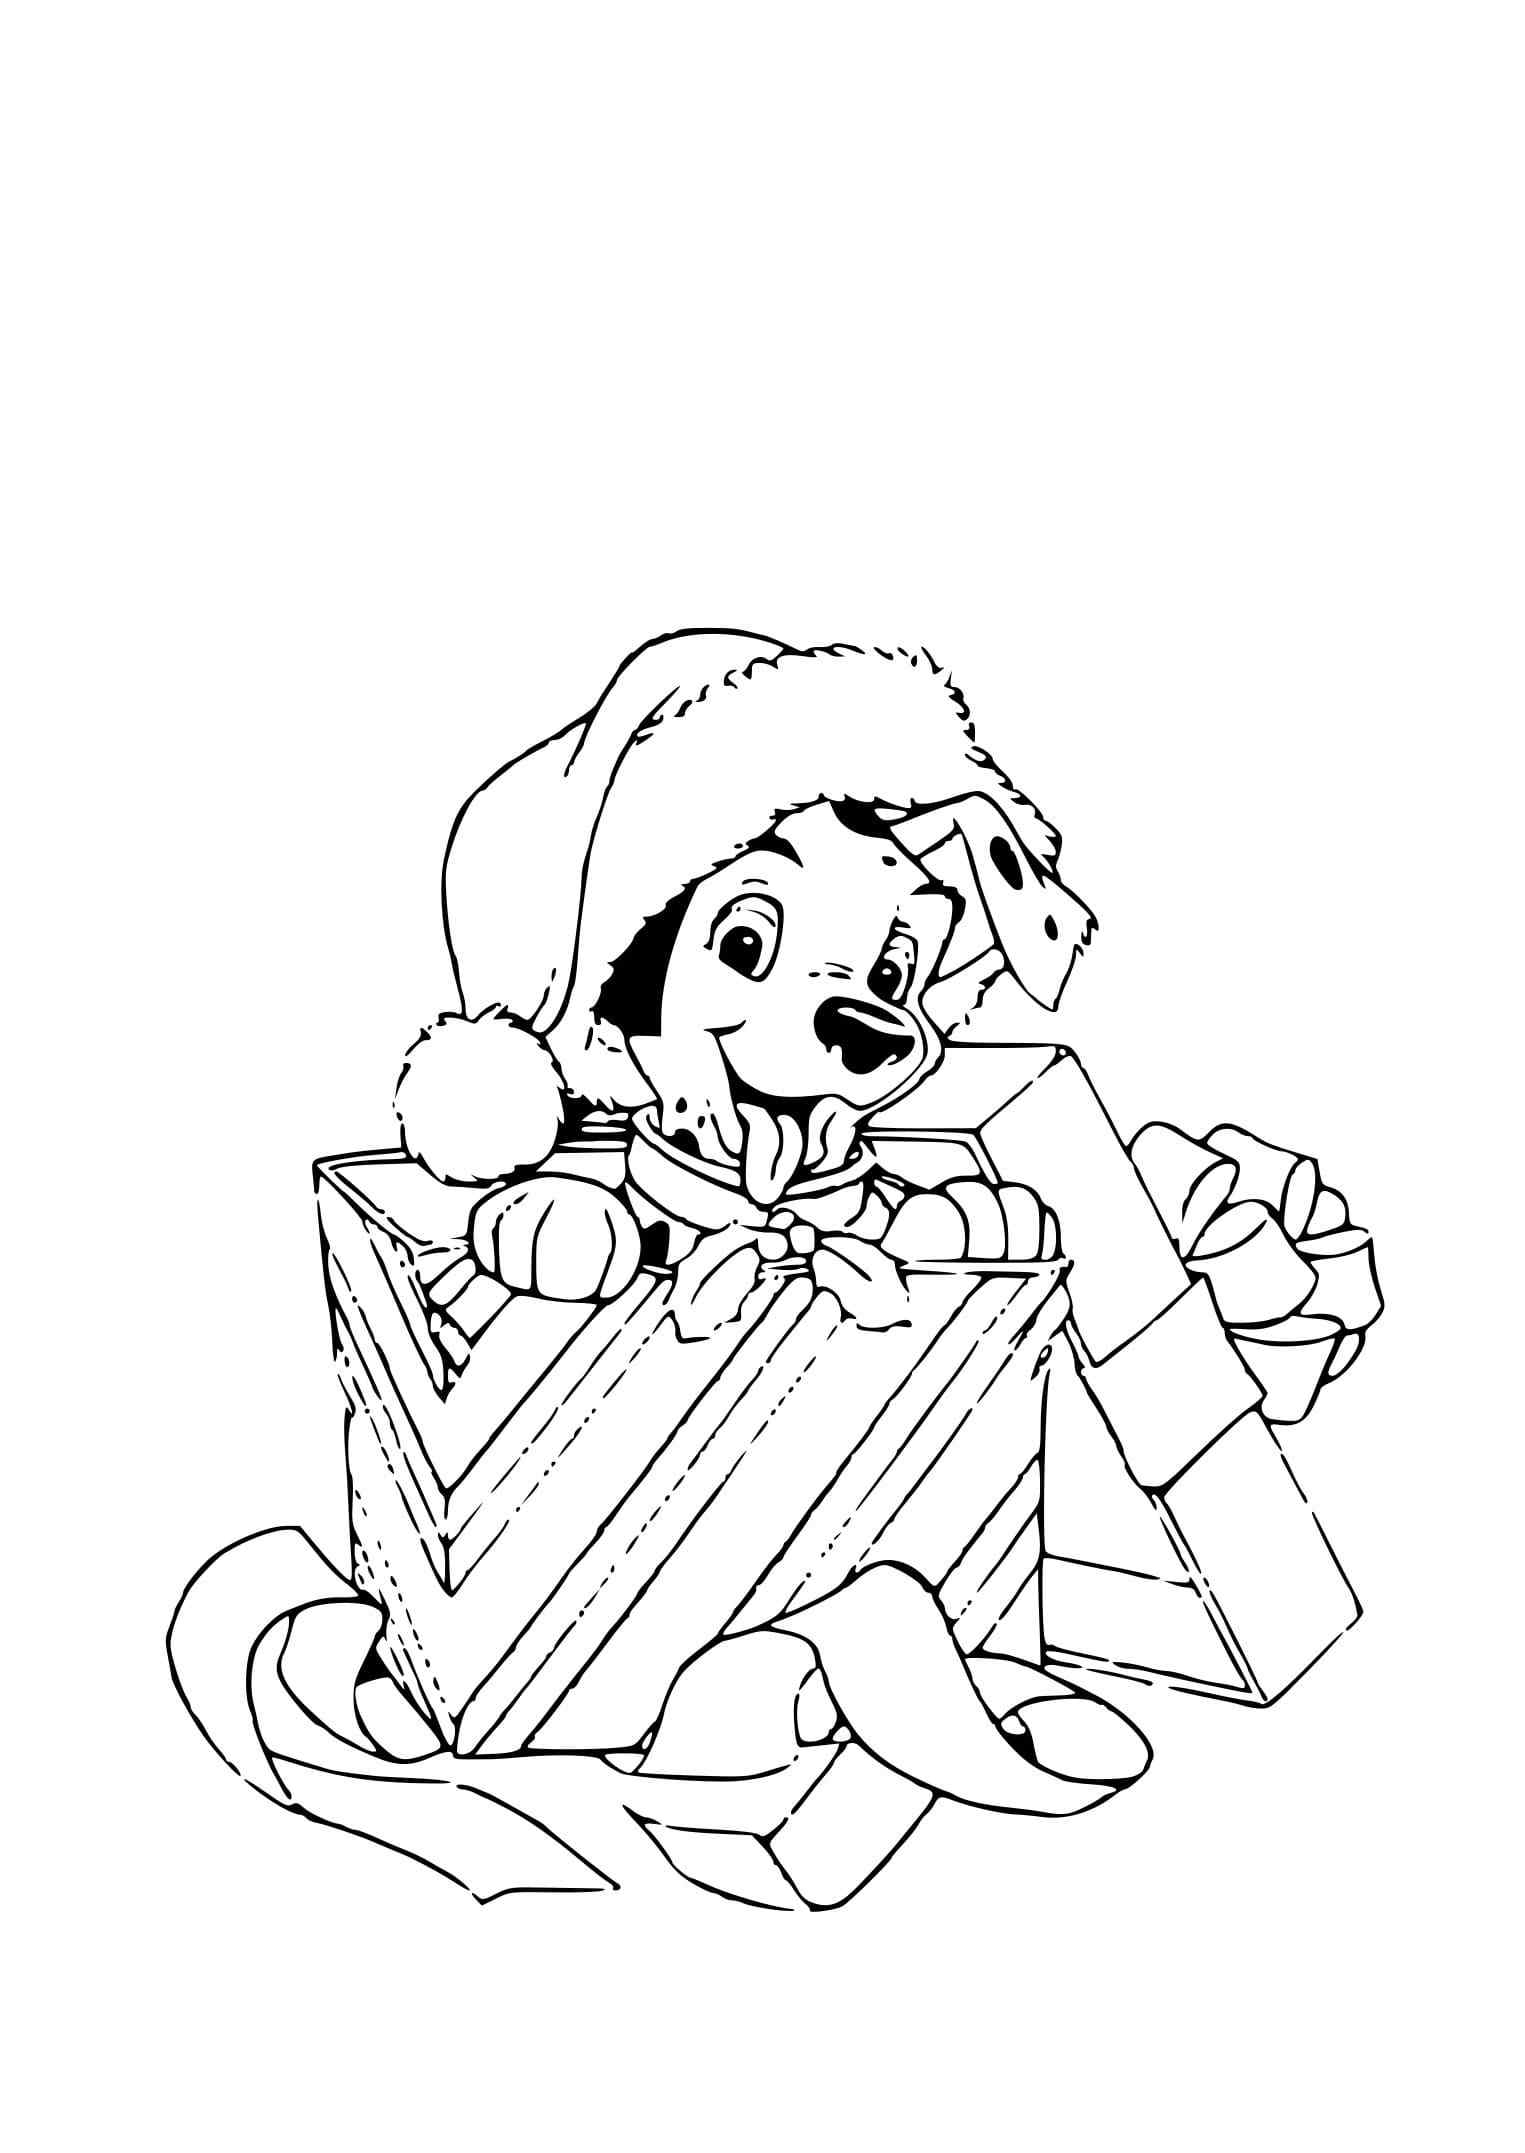 A Christmas Gift Coloring Page